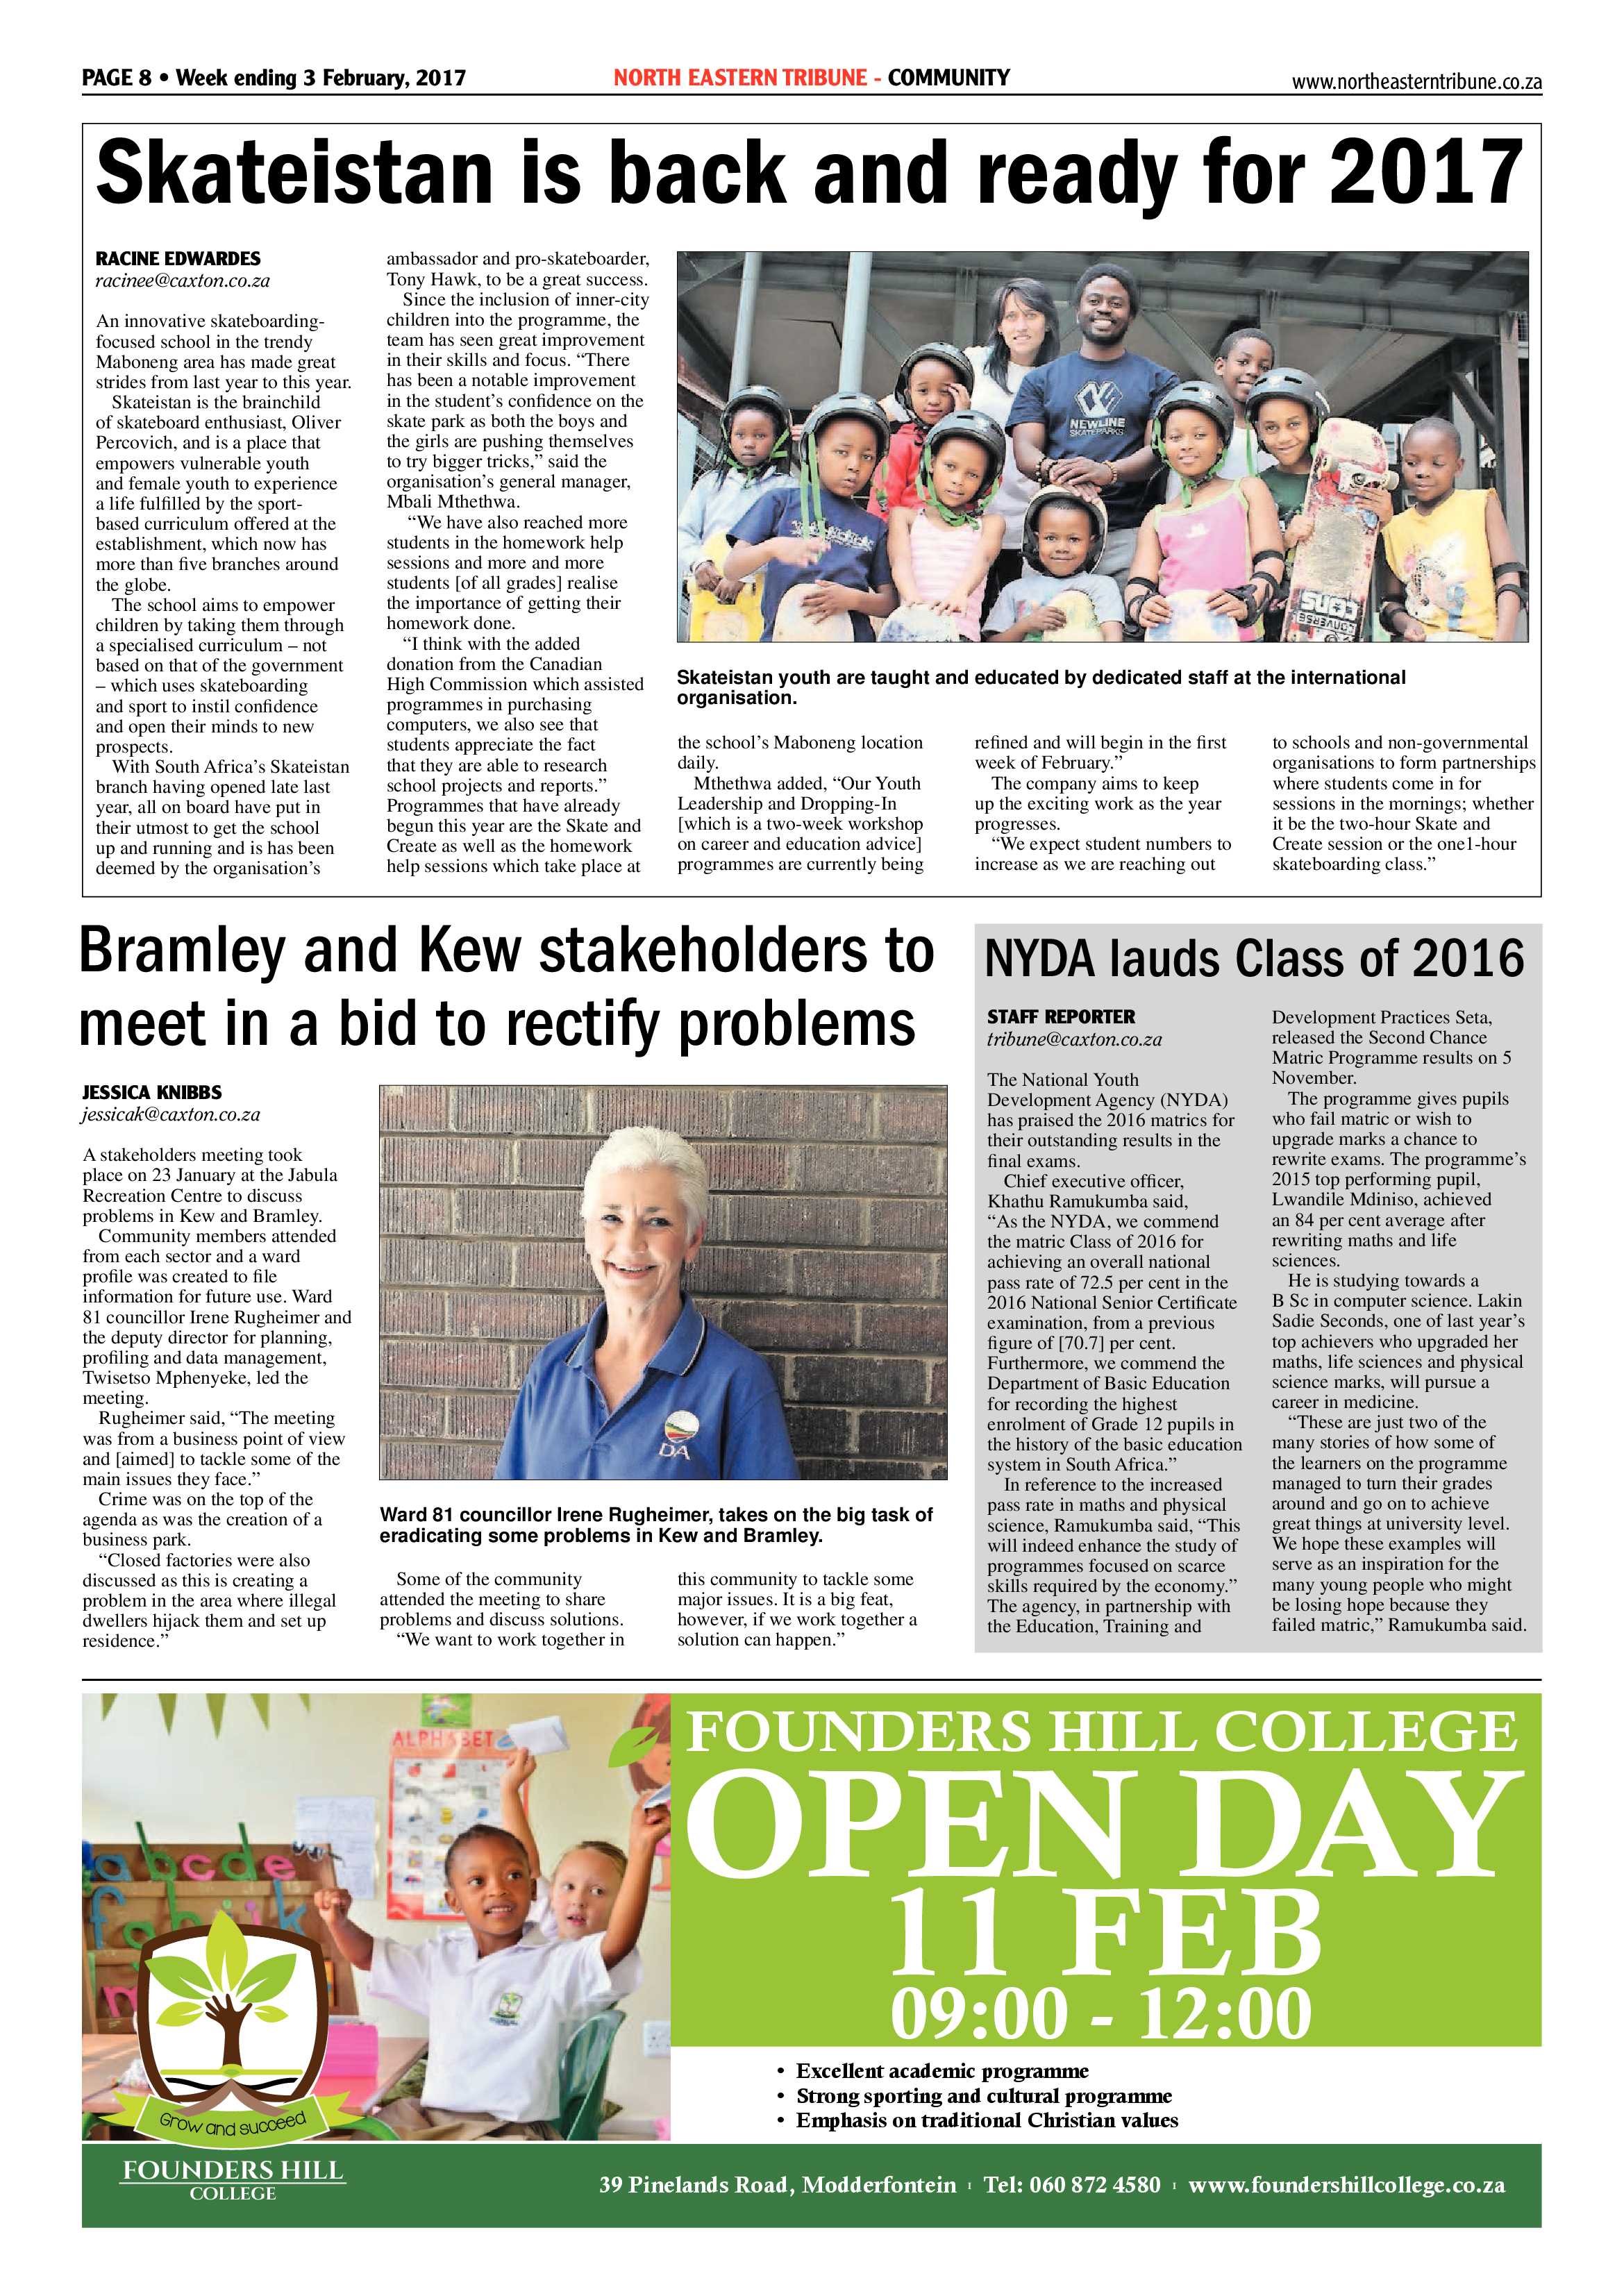 North Eastern Tribune 3 February, 2017 page 8